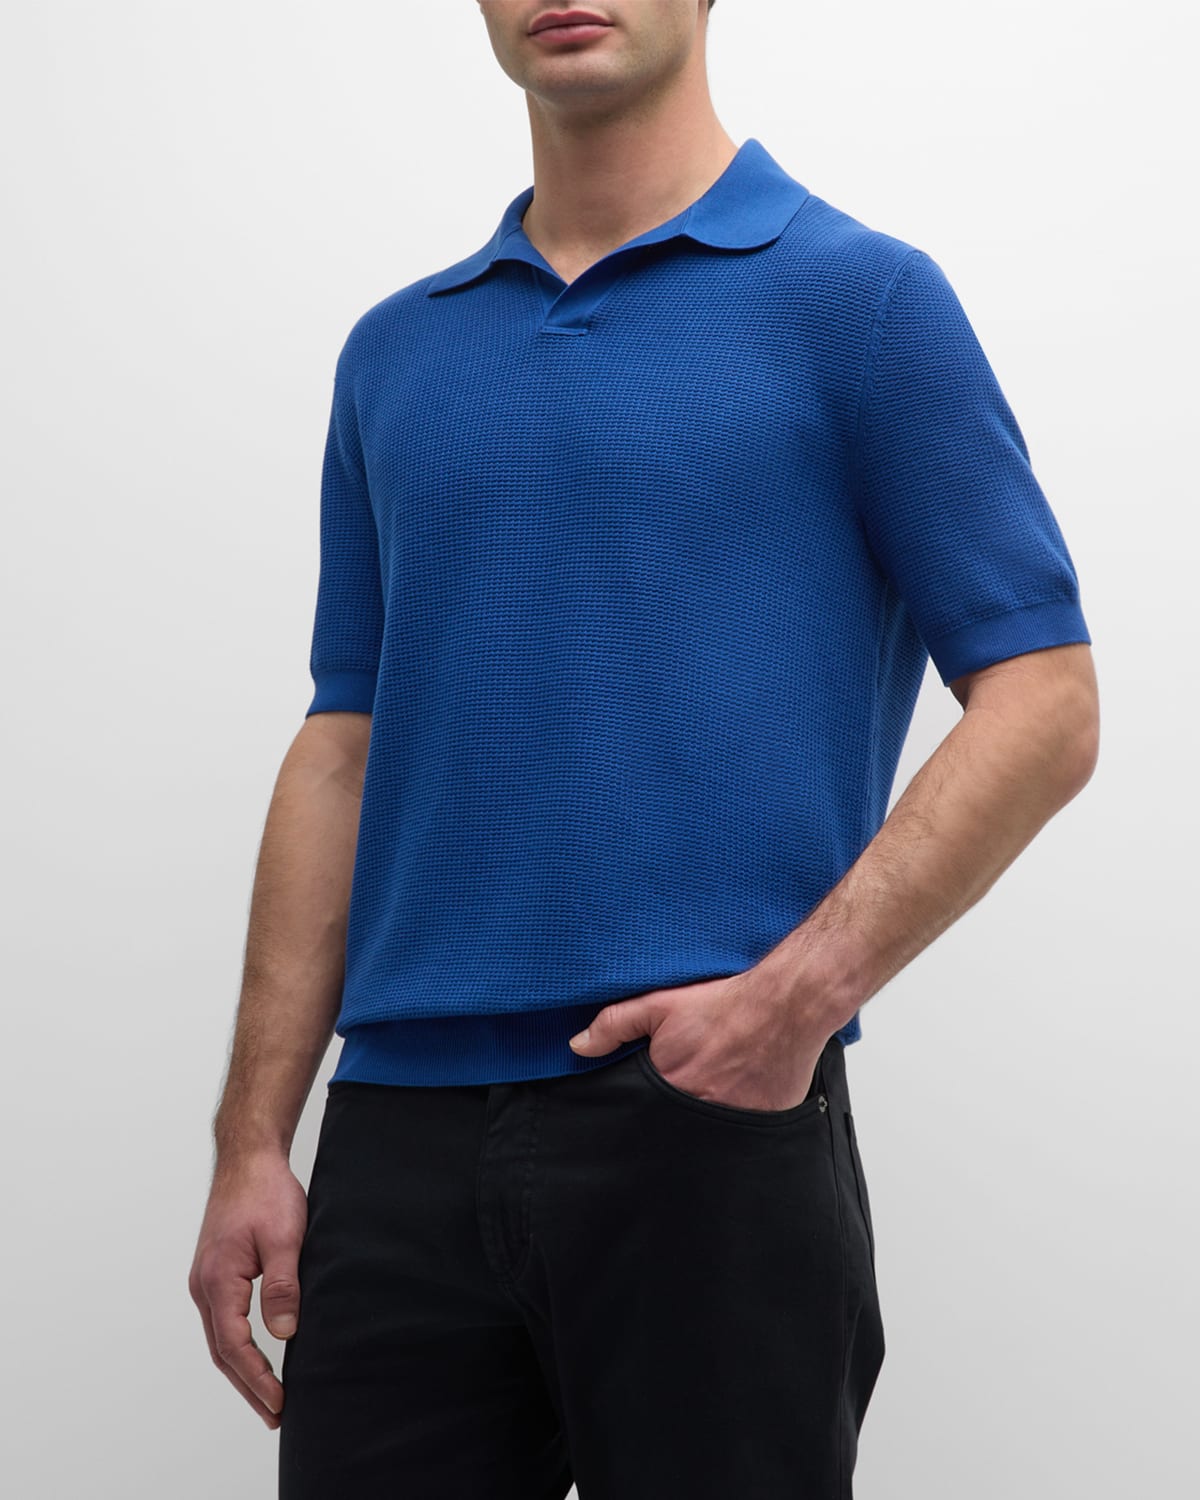 Zegna Men's Cotton Knit Short-sleeve Polo Jumper In Bright Blue Solid